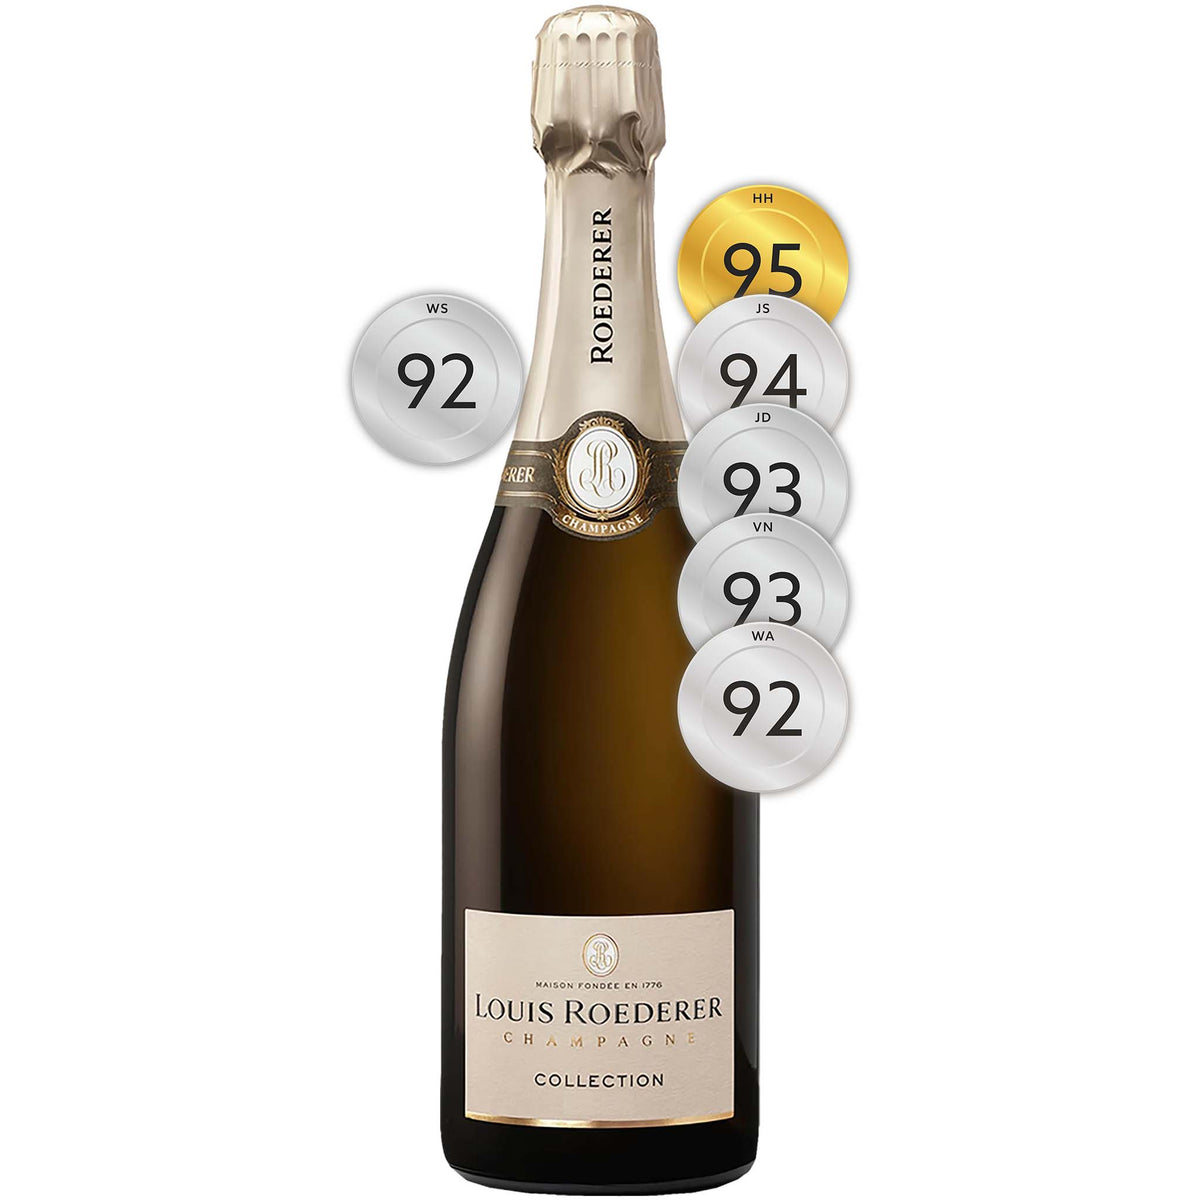 Louis Roederer Collection 243 (Gift Box)